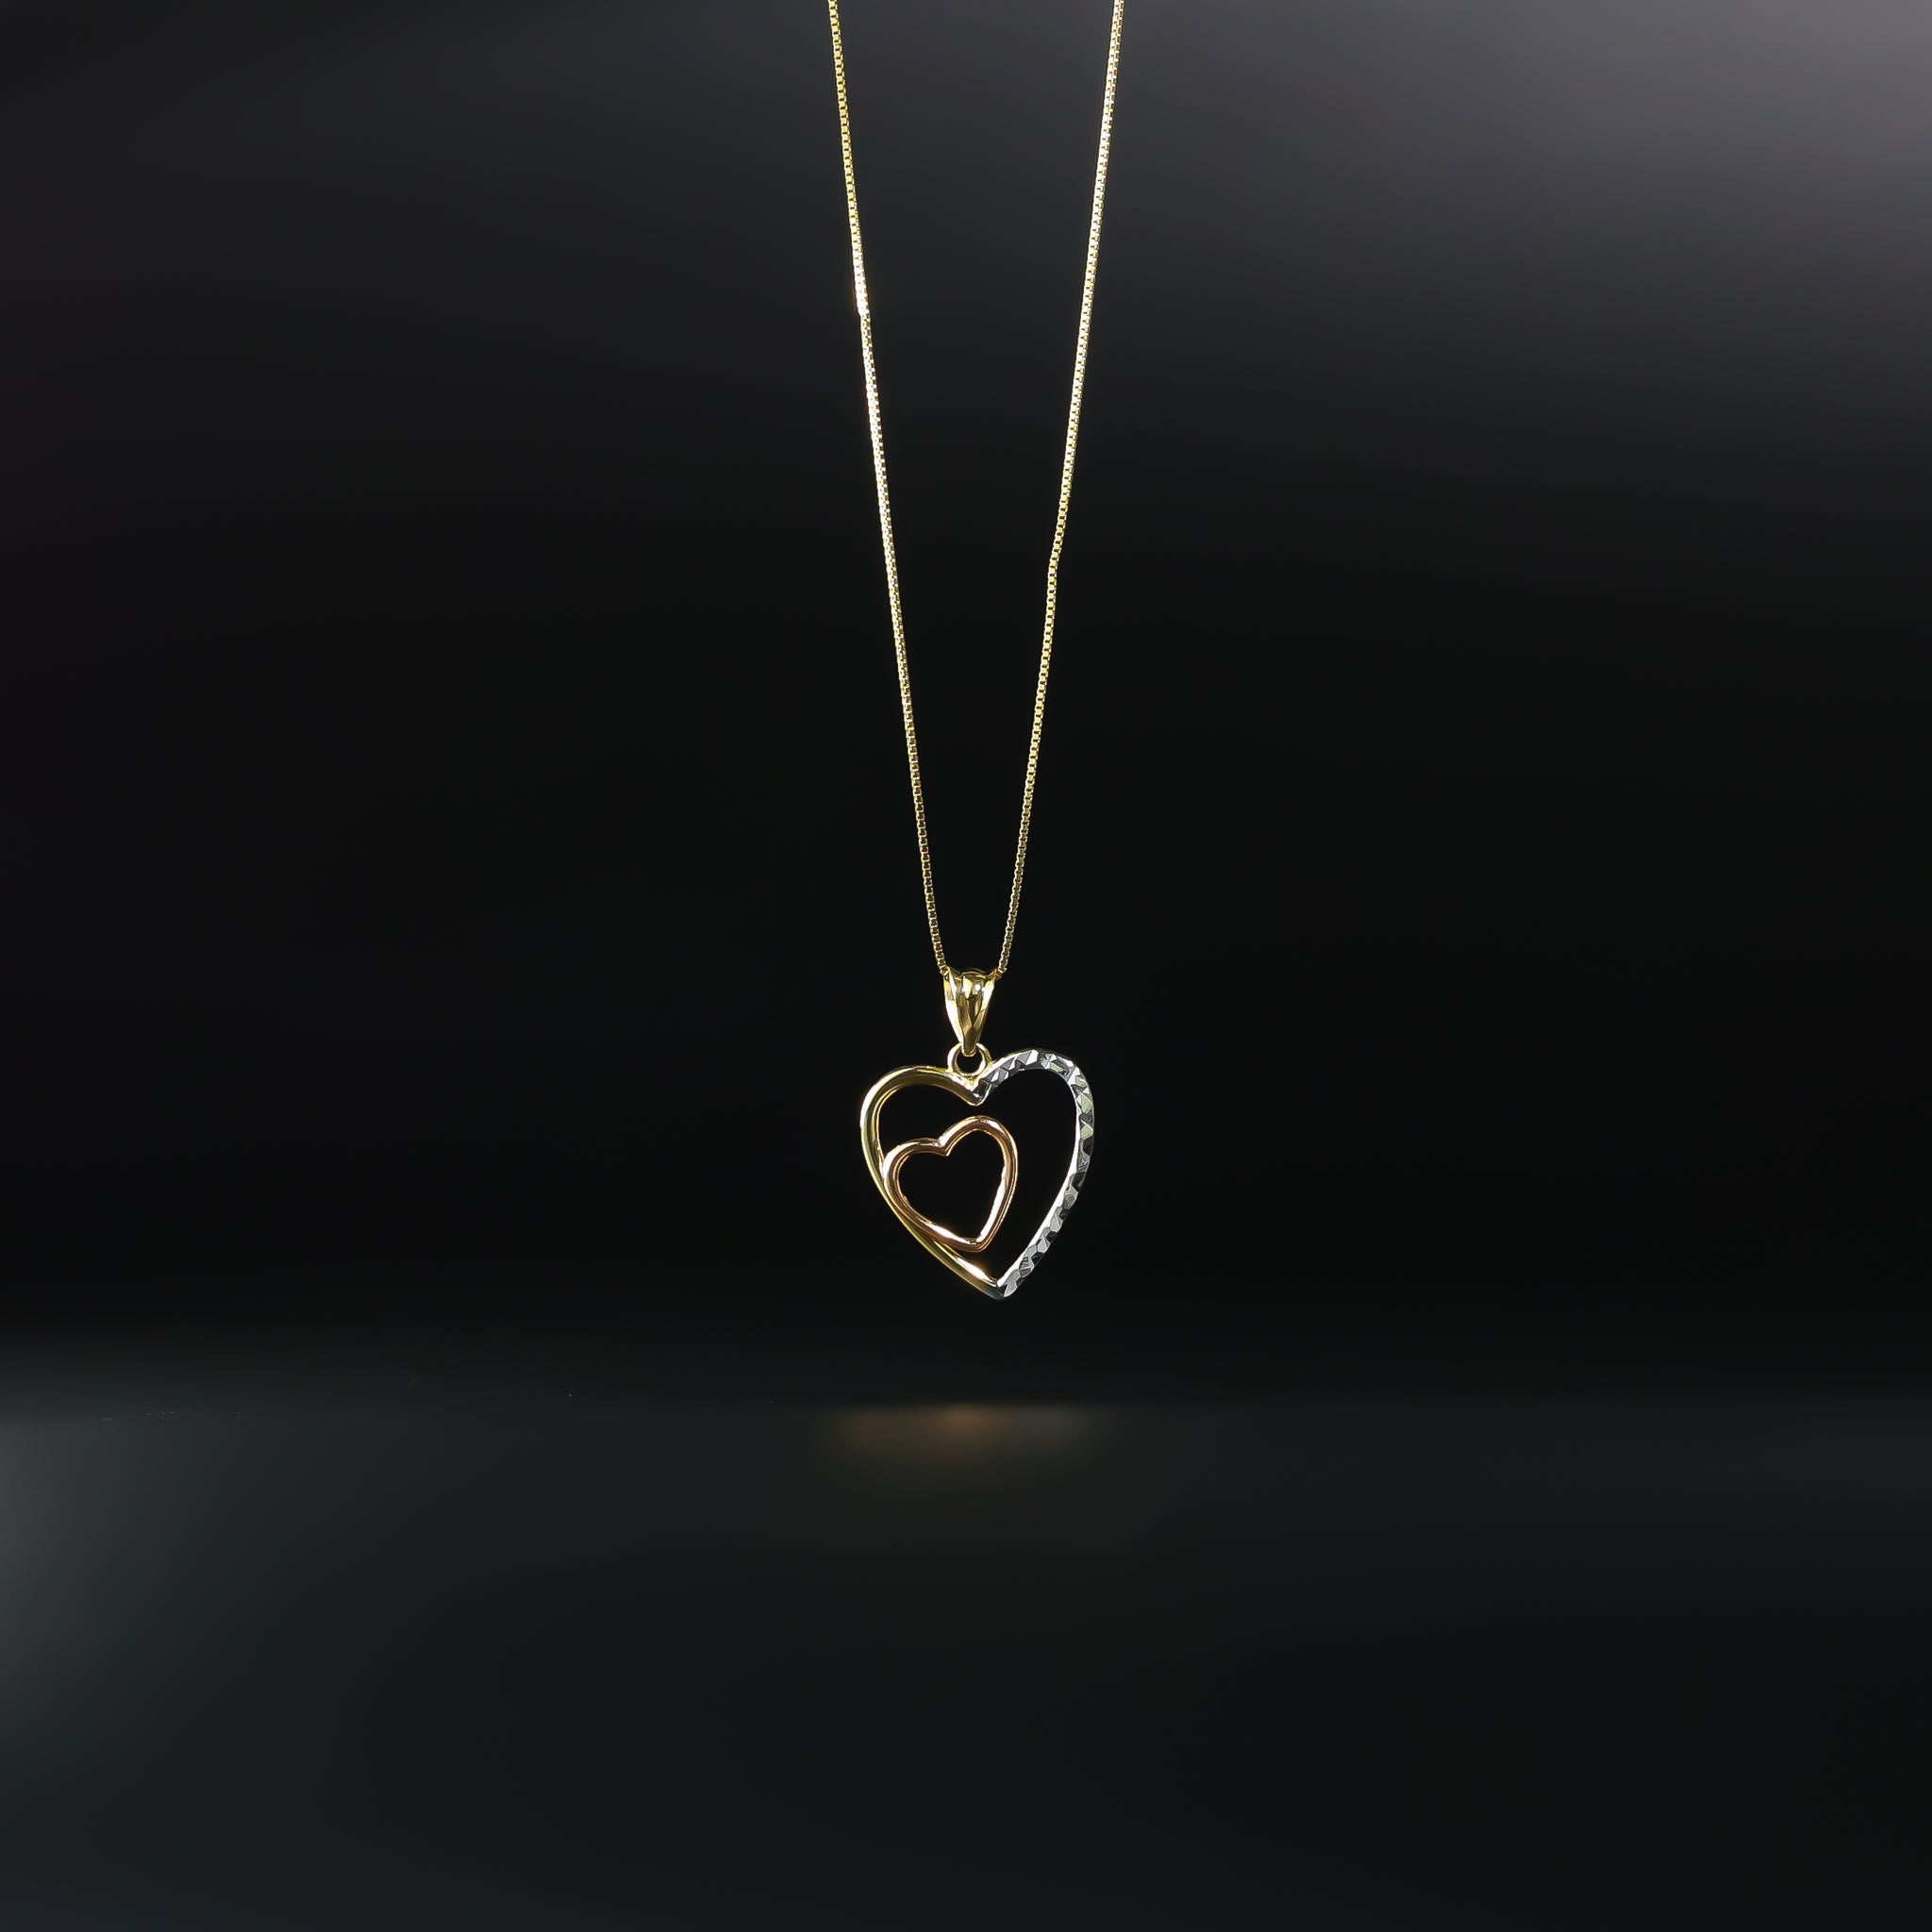 Gold Double Heart Pendant Model-PT2544 - Charlie & Co. Jewelry